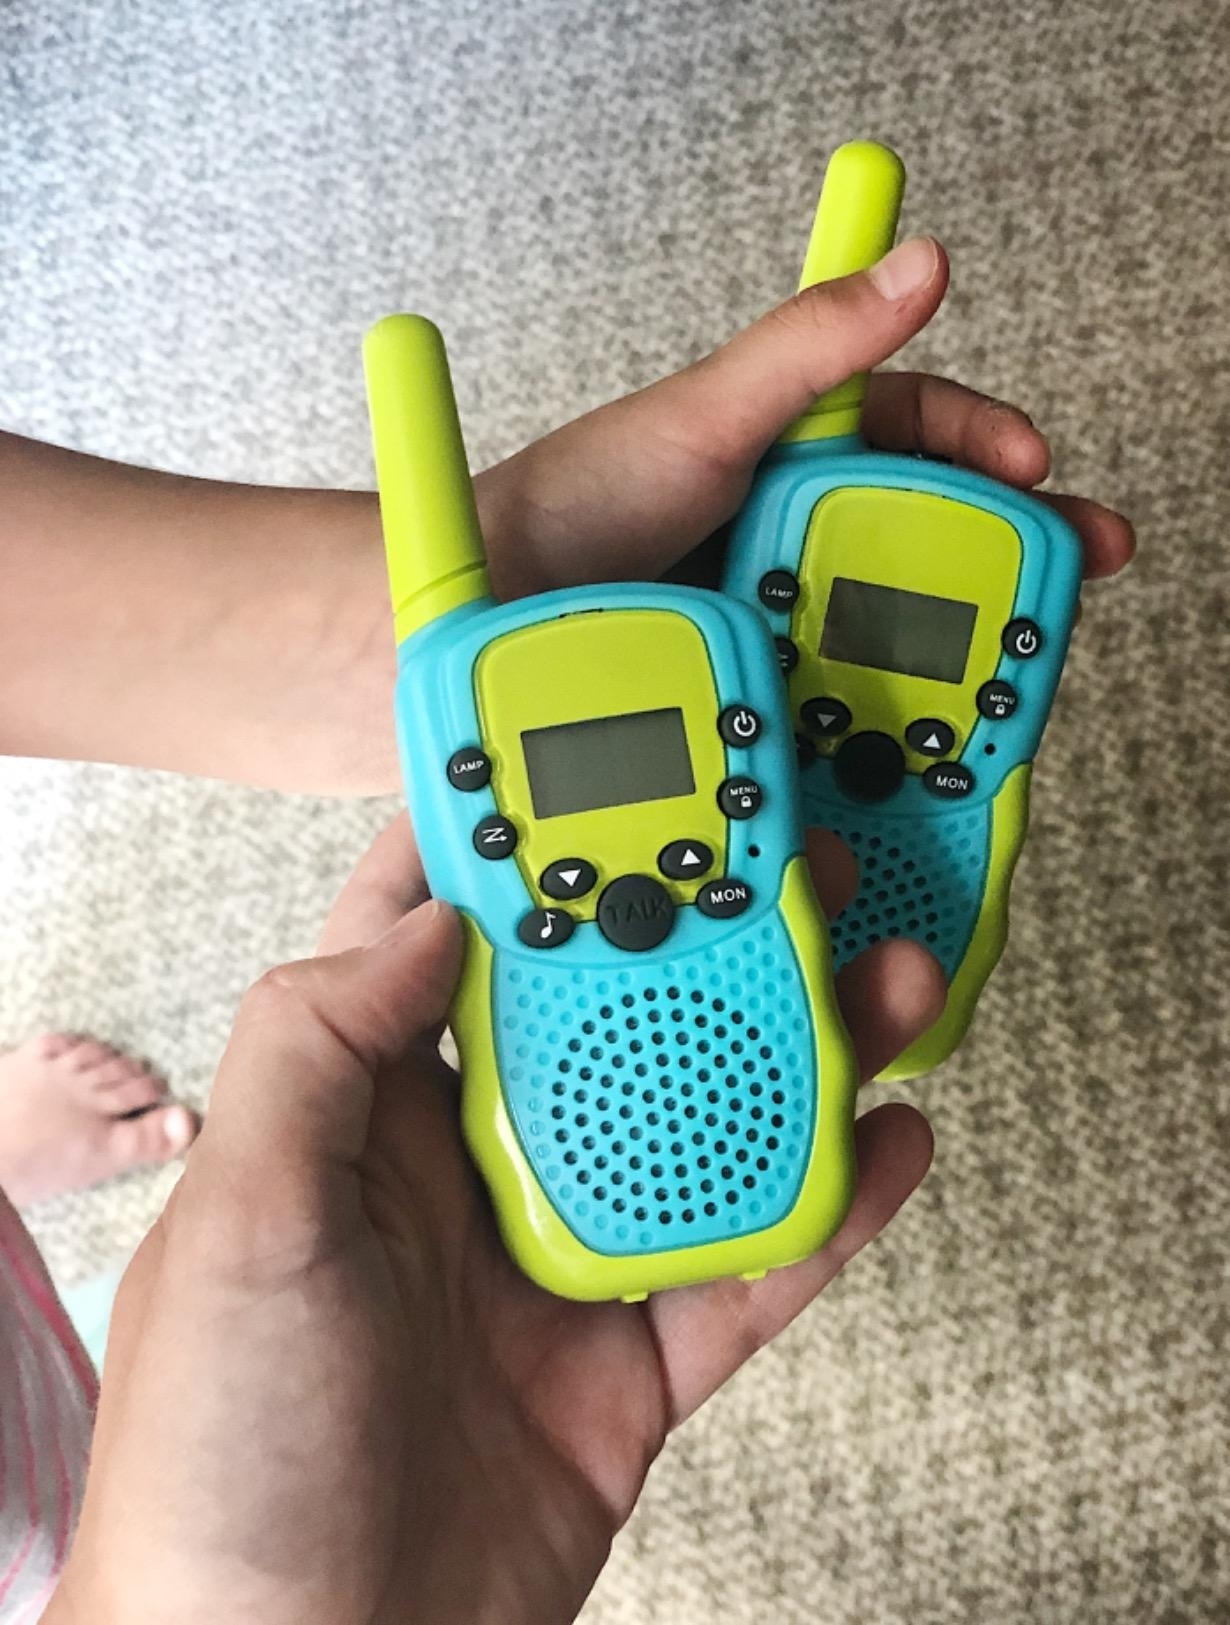 Two hands holding a pair of blue and green walkie-talkies with buttons and a small screen, suitable for kids&#x27; toys